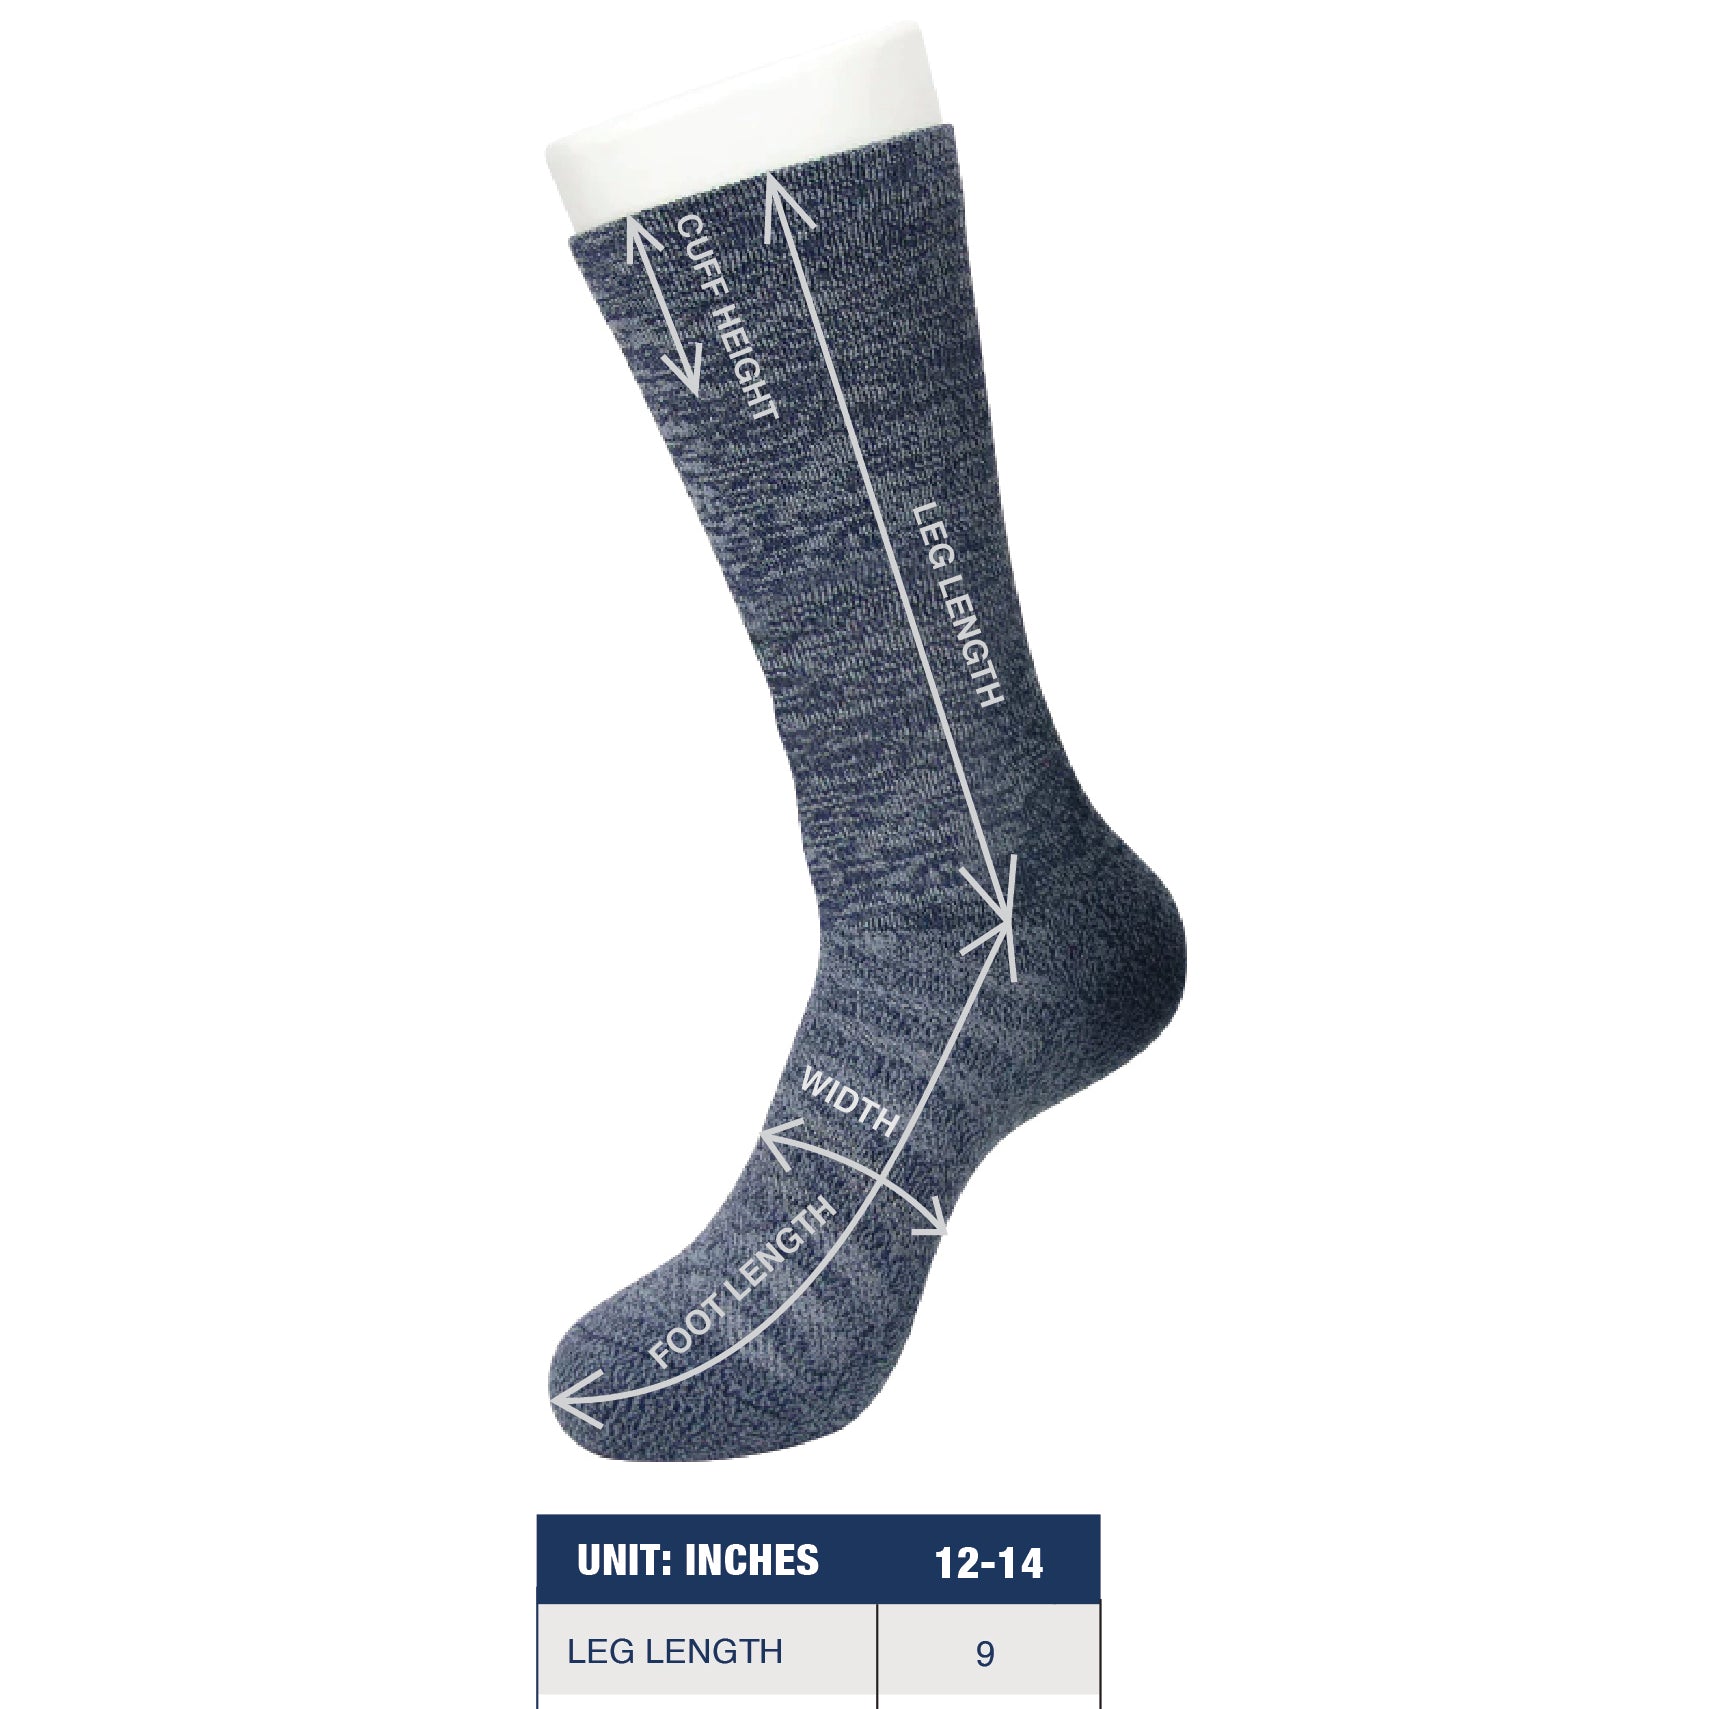 Grateful Dead Athletic Socks Steal Your Face Heather Blue - Section 119